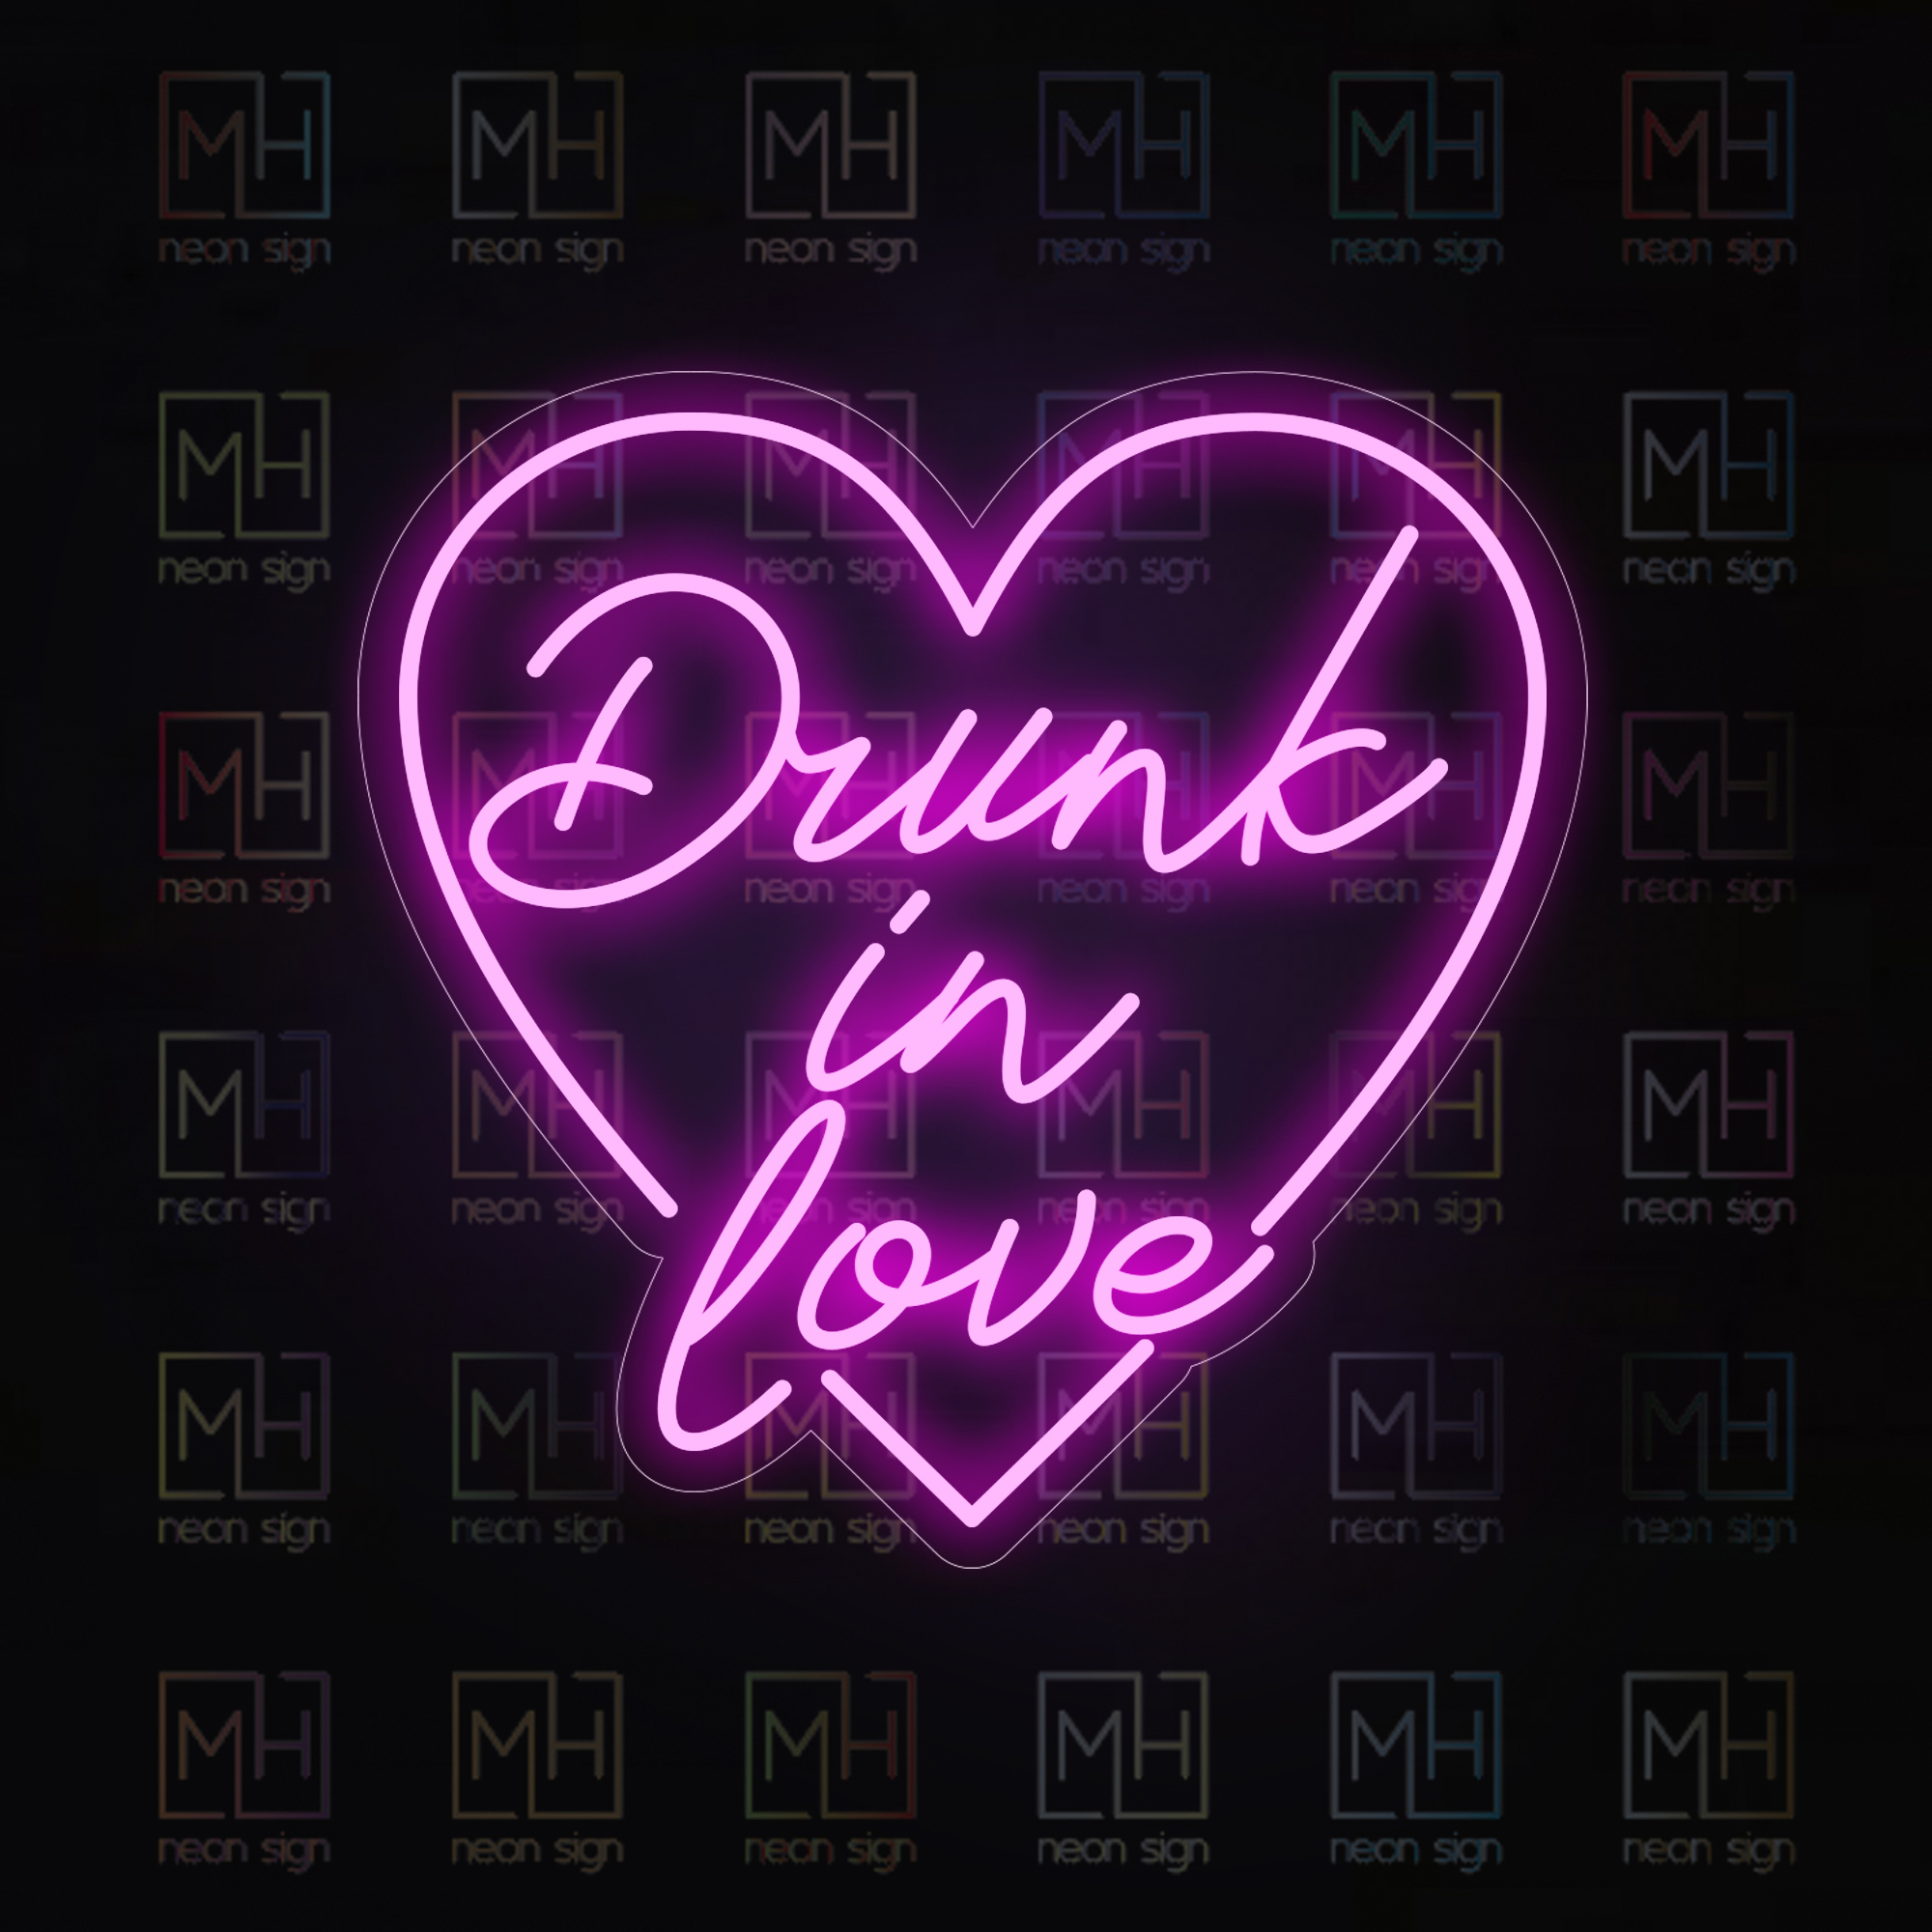 Drunk in love LED Neon Sign-MHneonsign